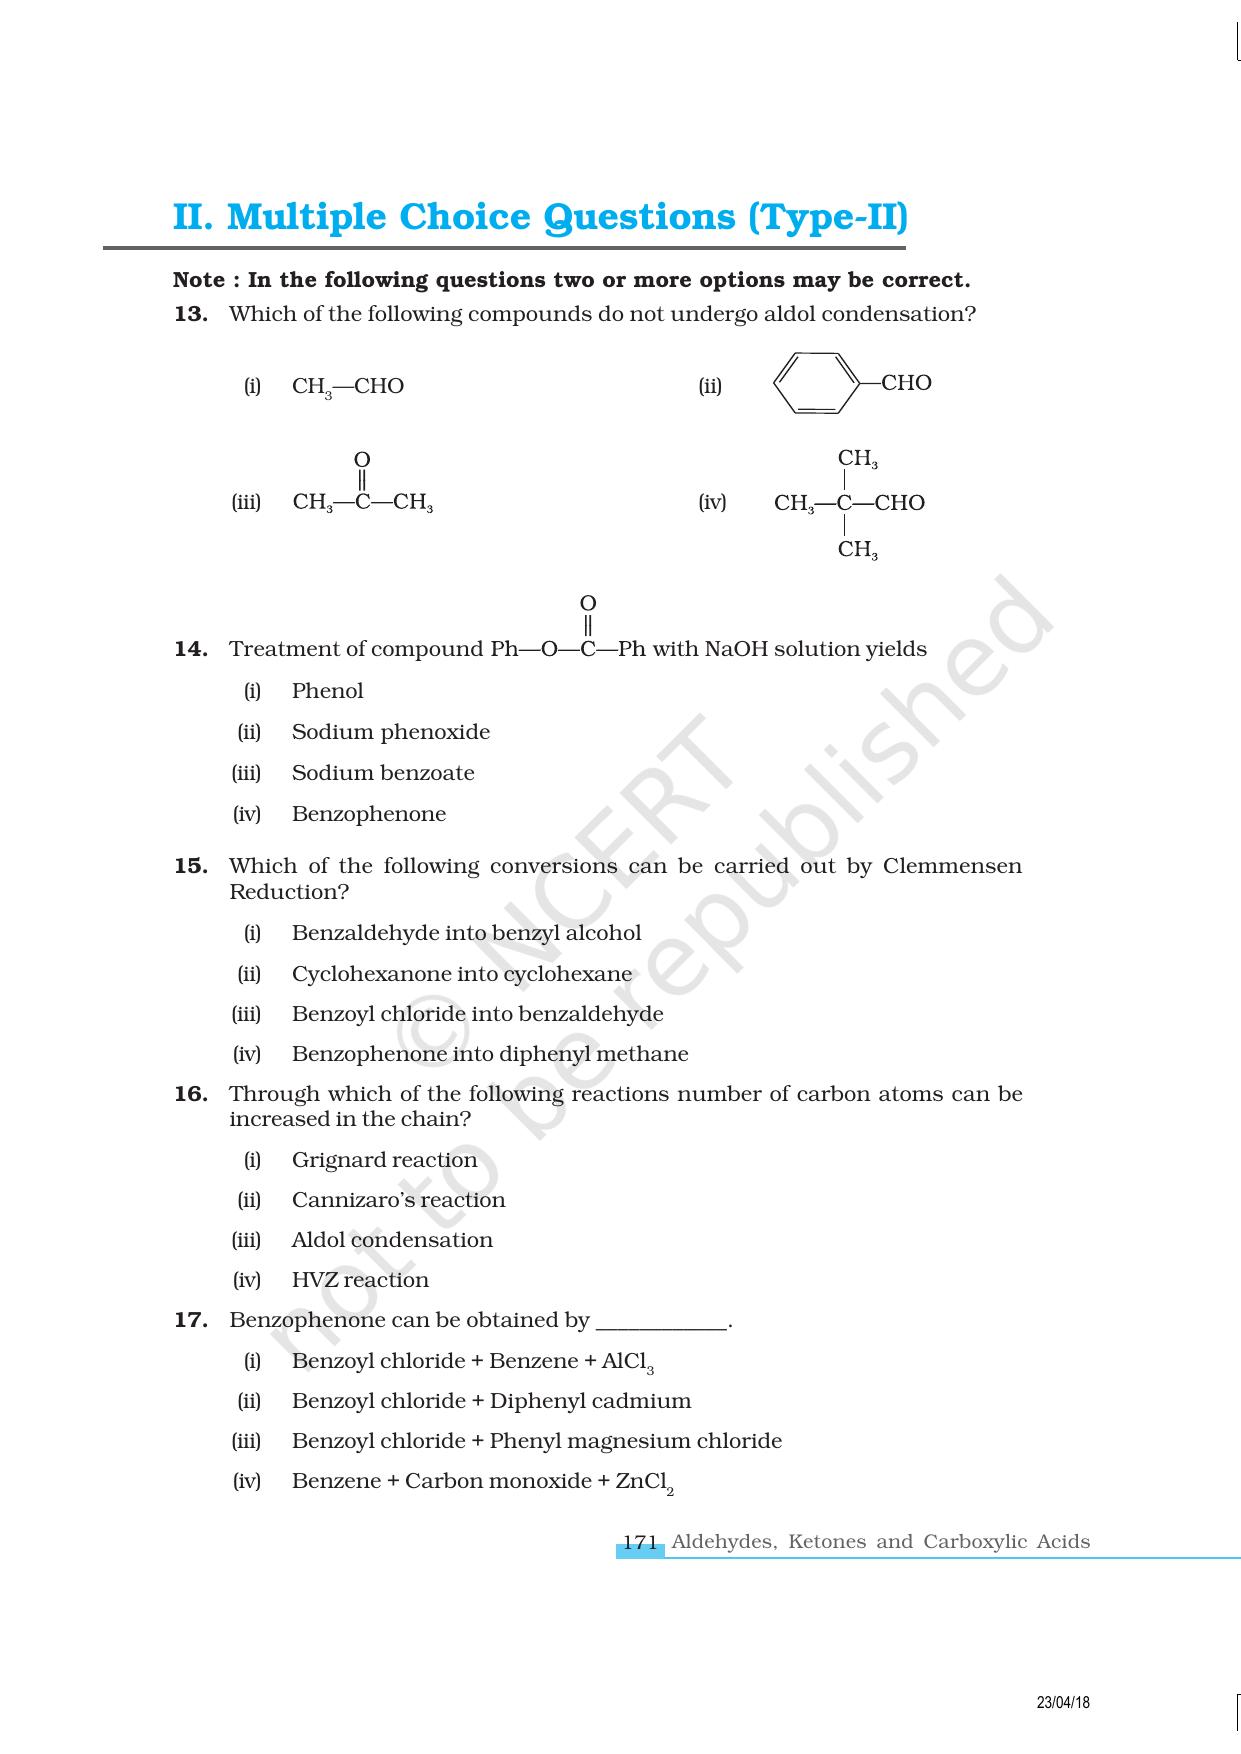 NCERT Exemplar Book for Class 12 Chemistry: Chapter 12 Aldehydes, Ketones and Carboxylic Acids - Page 4